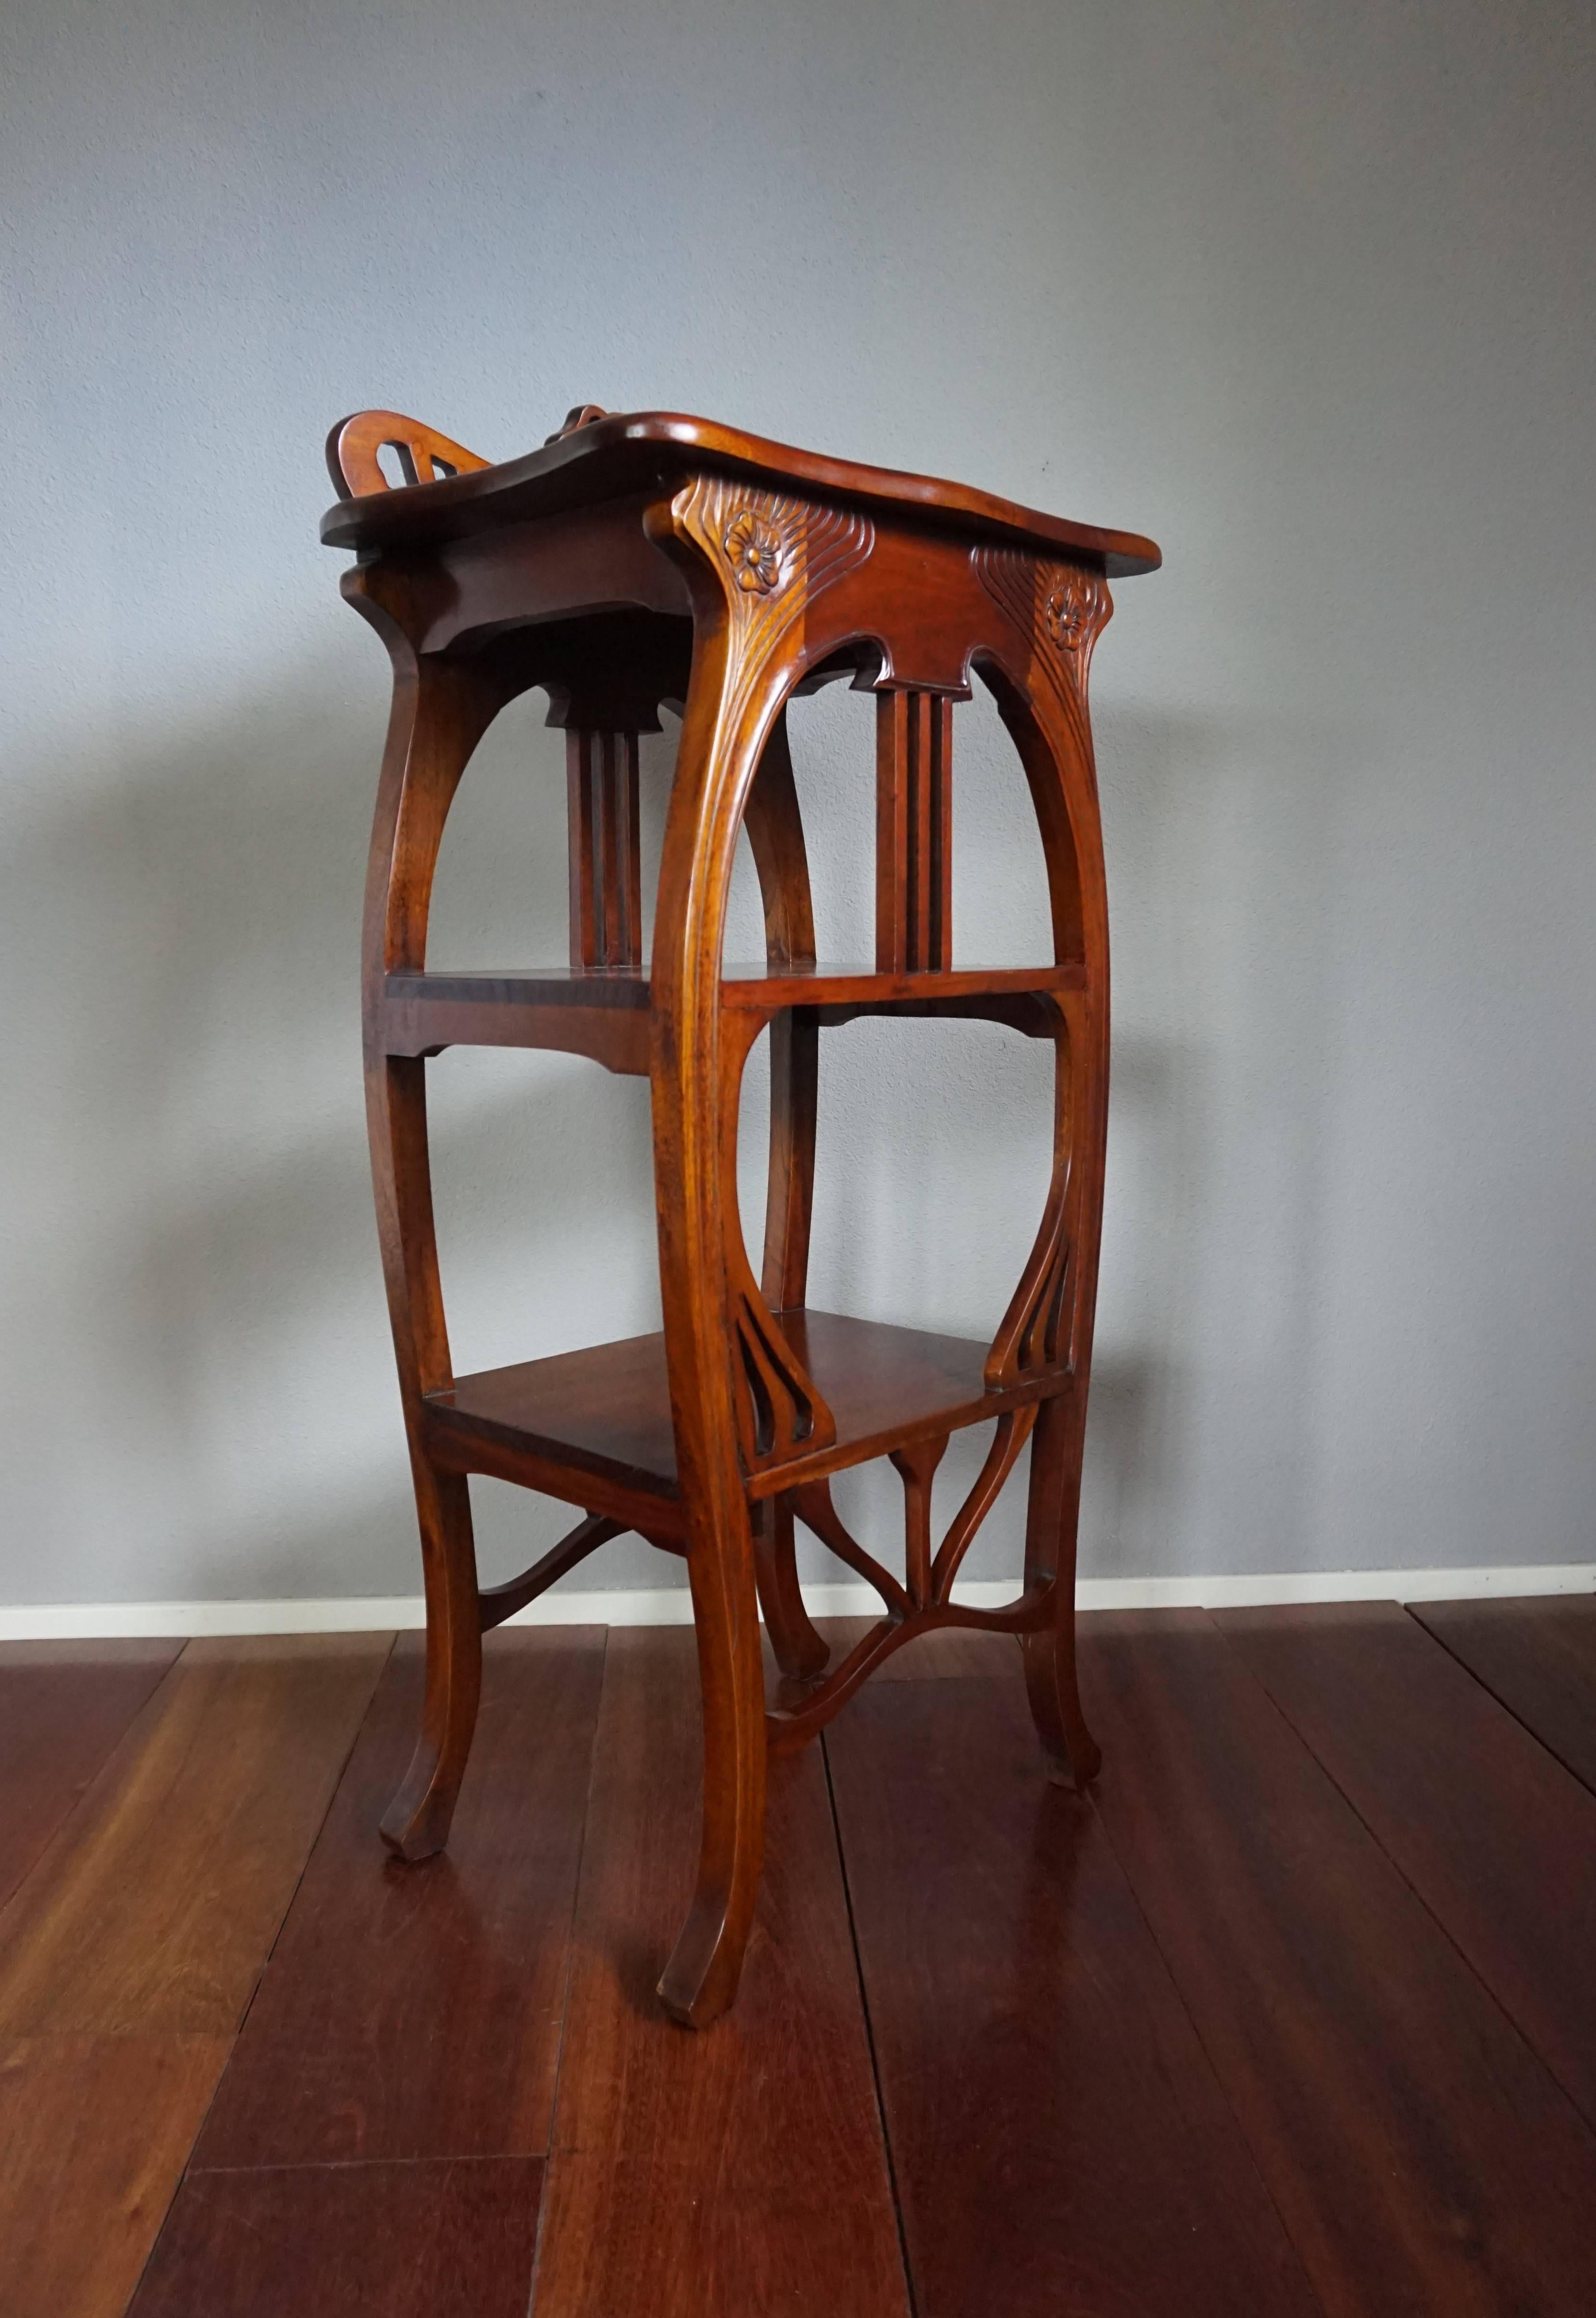 20th Century Art Nouveau Style Etagere Stand / Side Table in the Manner of Louis Majorelle